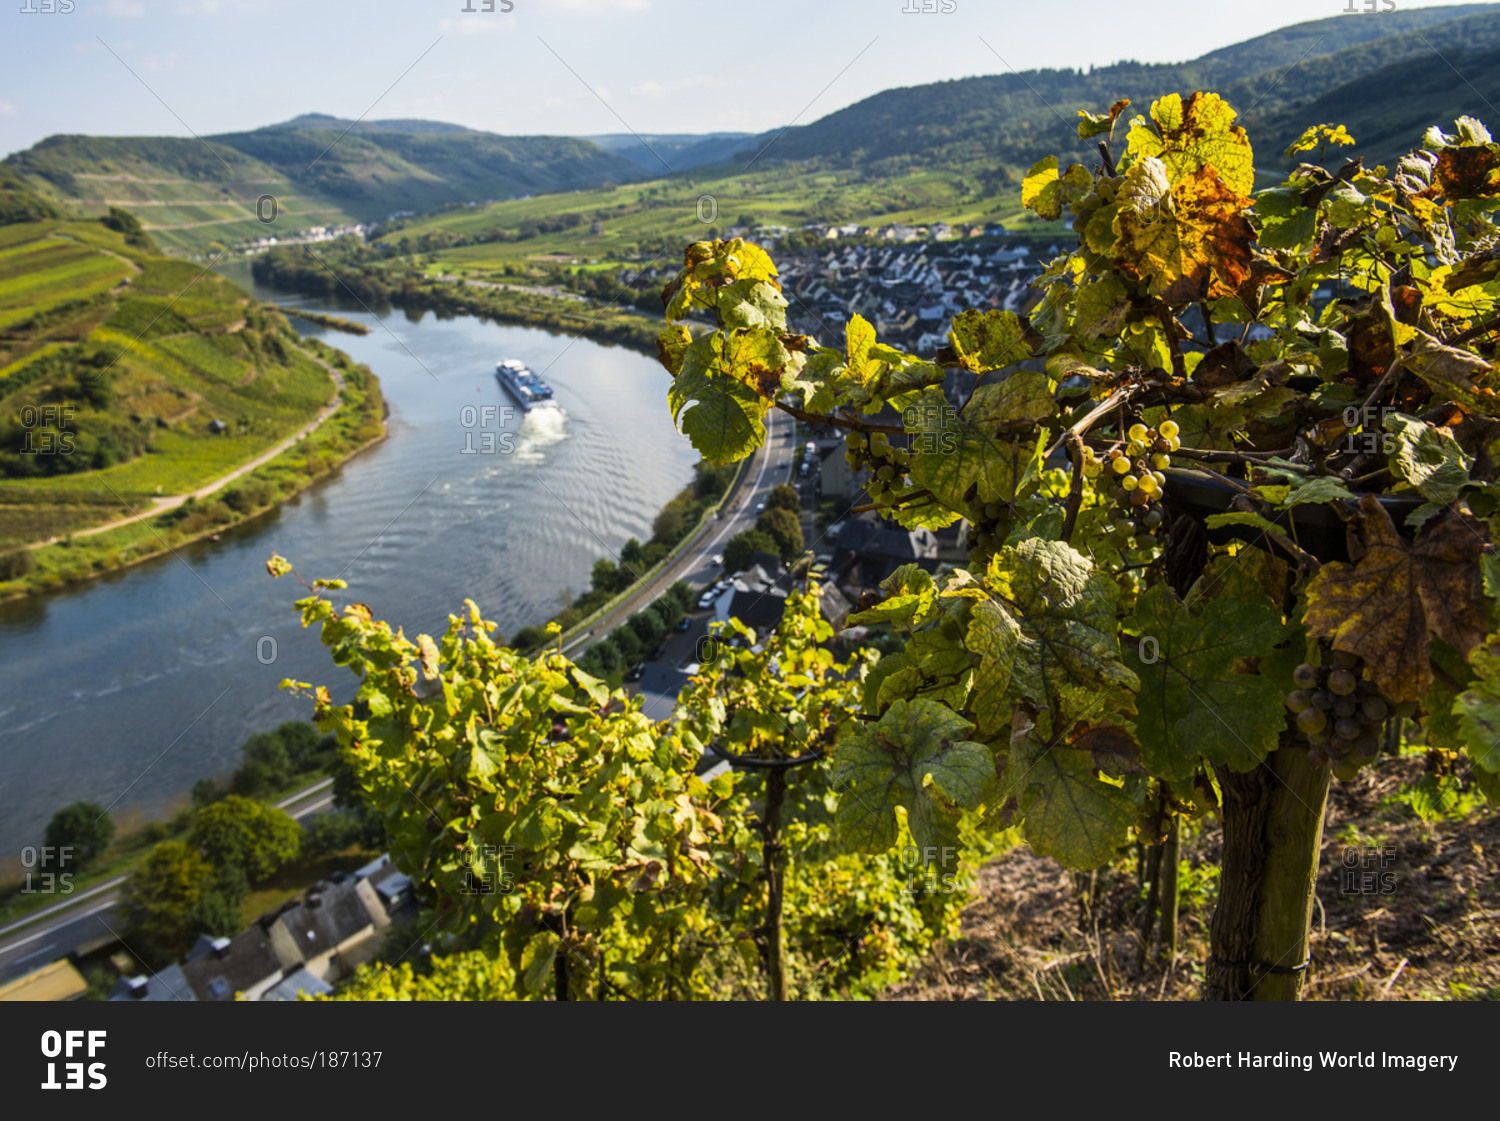 Cruise ship at the Moselle River bend at Bremm seen through the vineyards, Moselle Valley, Rhineland-Palatinate, Germany